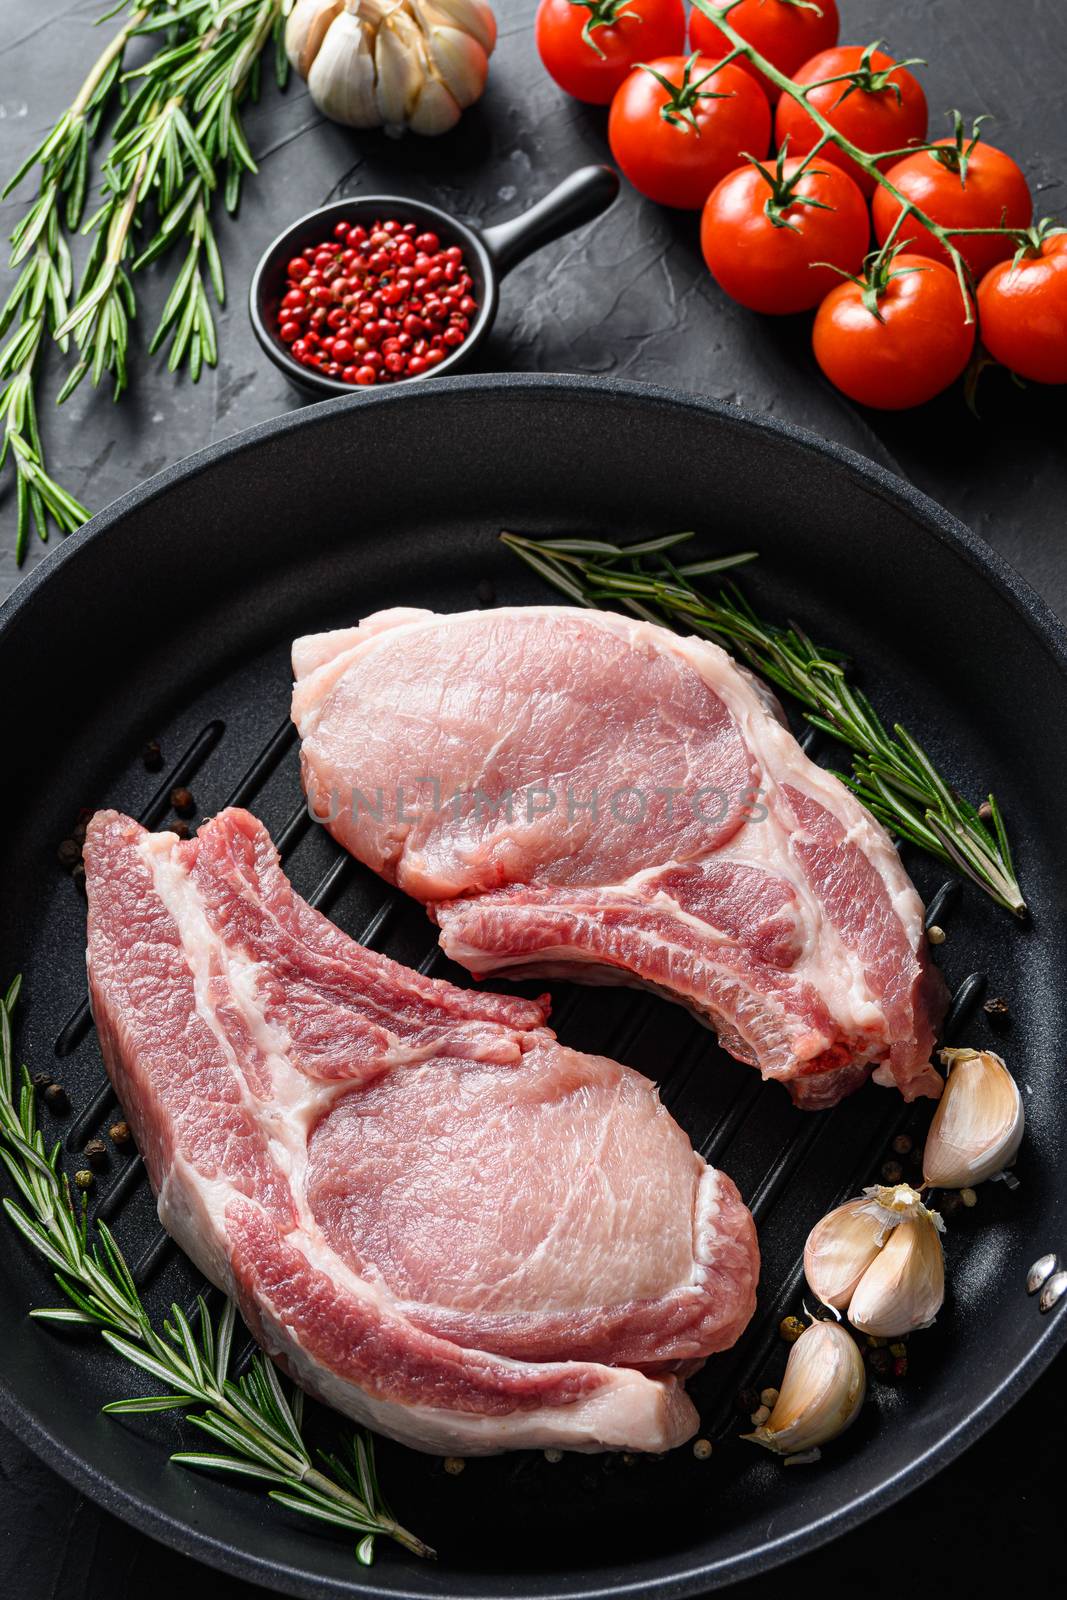 Raw Pork Loin chops in skillet near ingredients wtih herbs pepper and tomatoes top view vertical selective focus by Ilianesolenyi